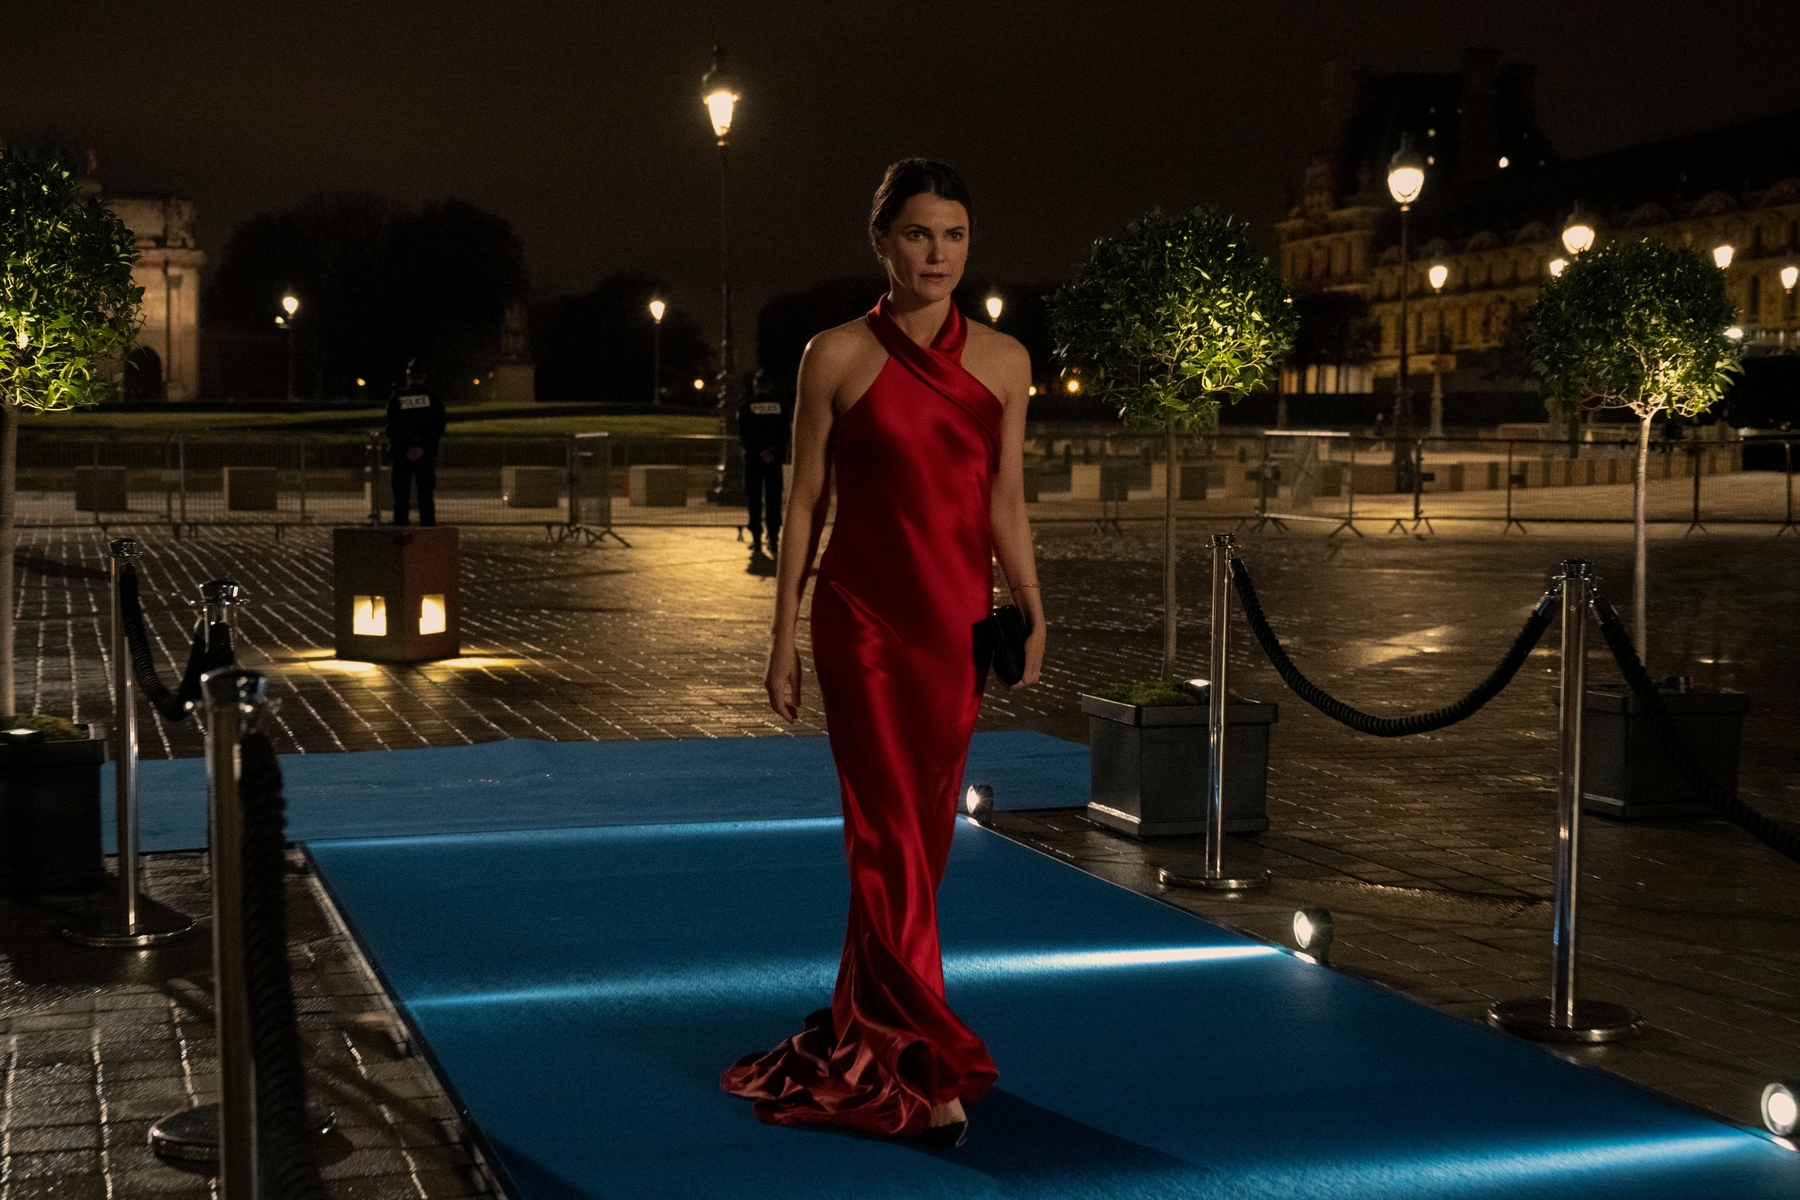 A woman in a gown enters an event in this image from Let's Not Turn This Into a Whole Big Production.